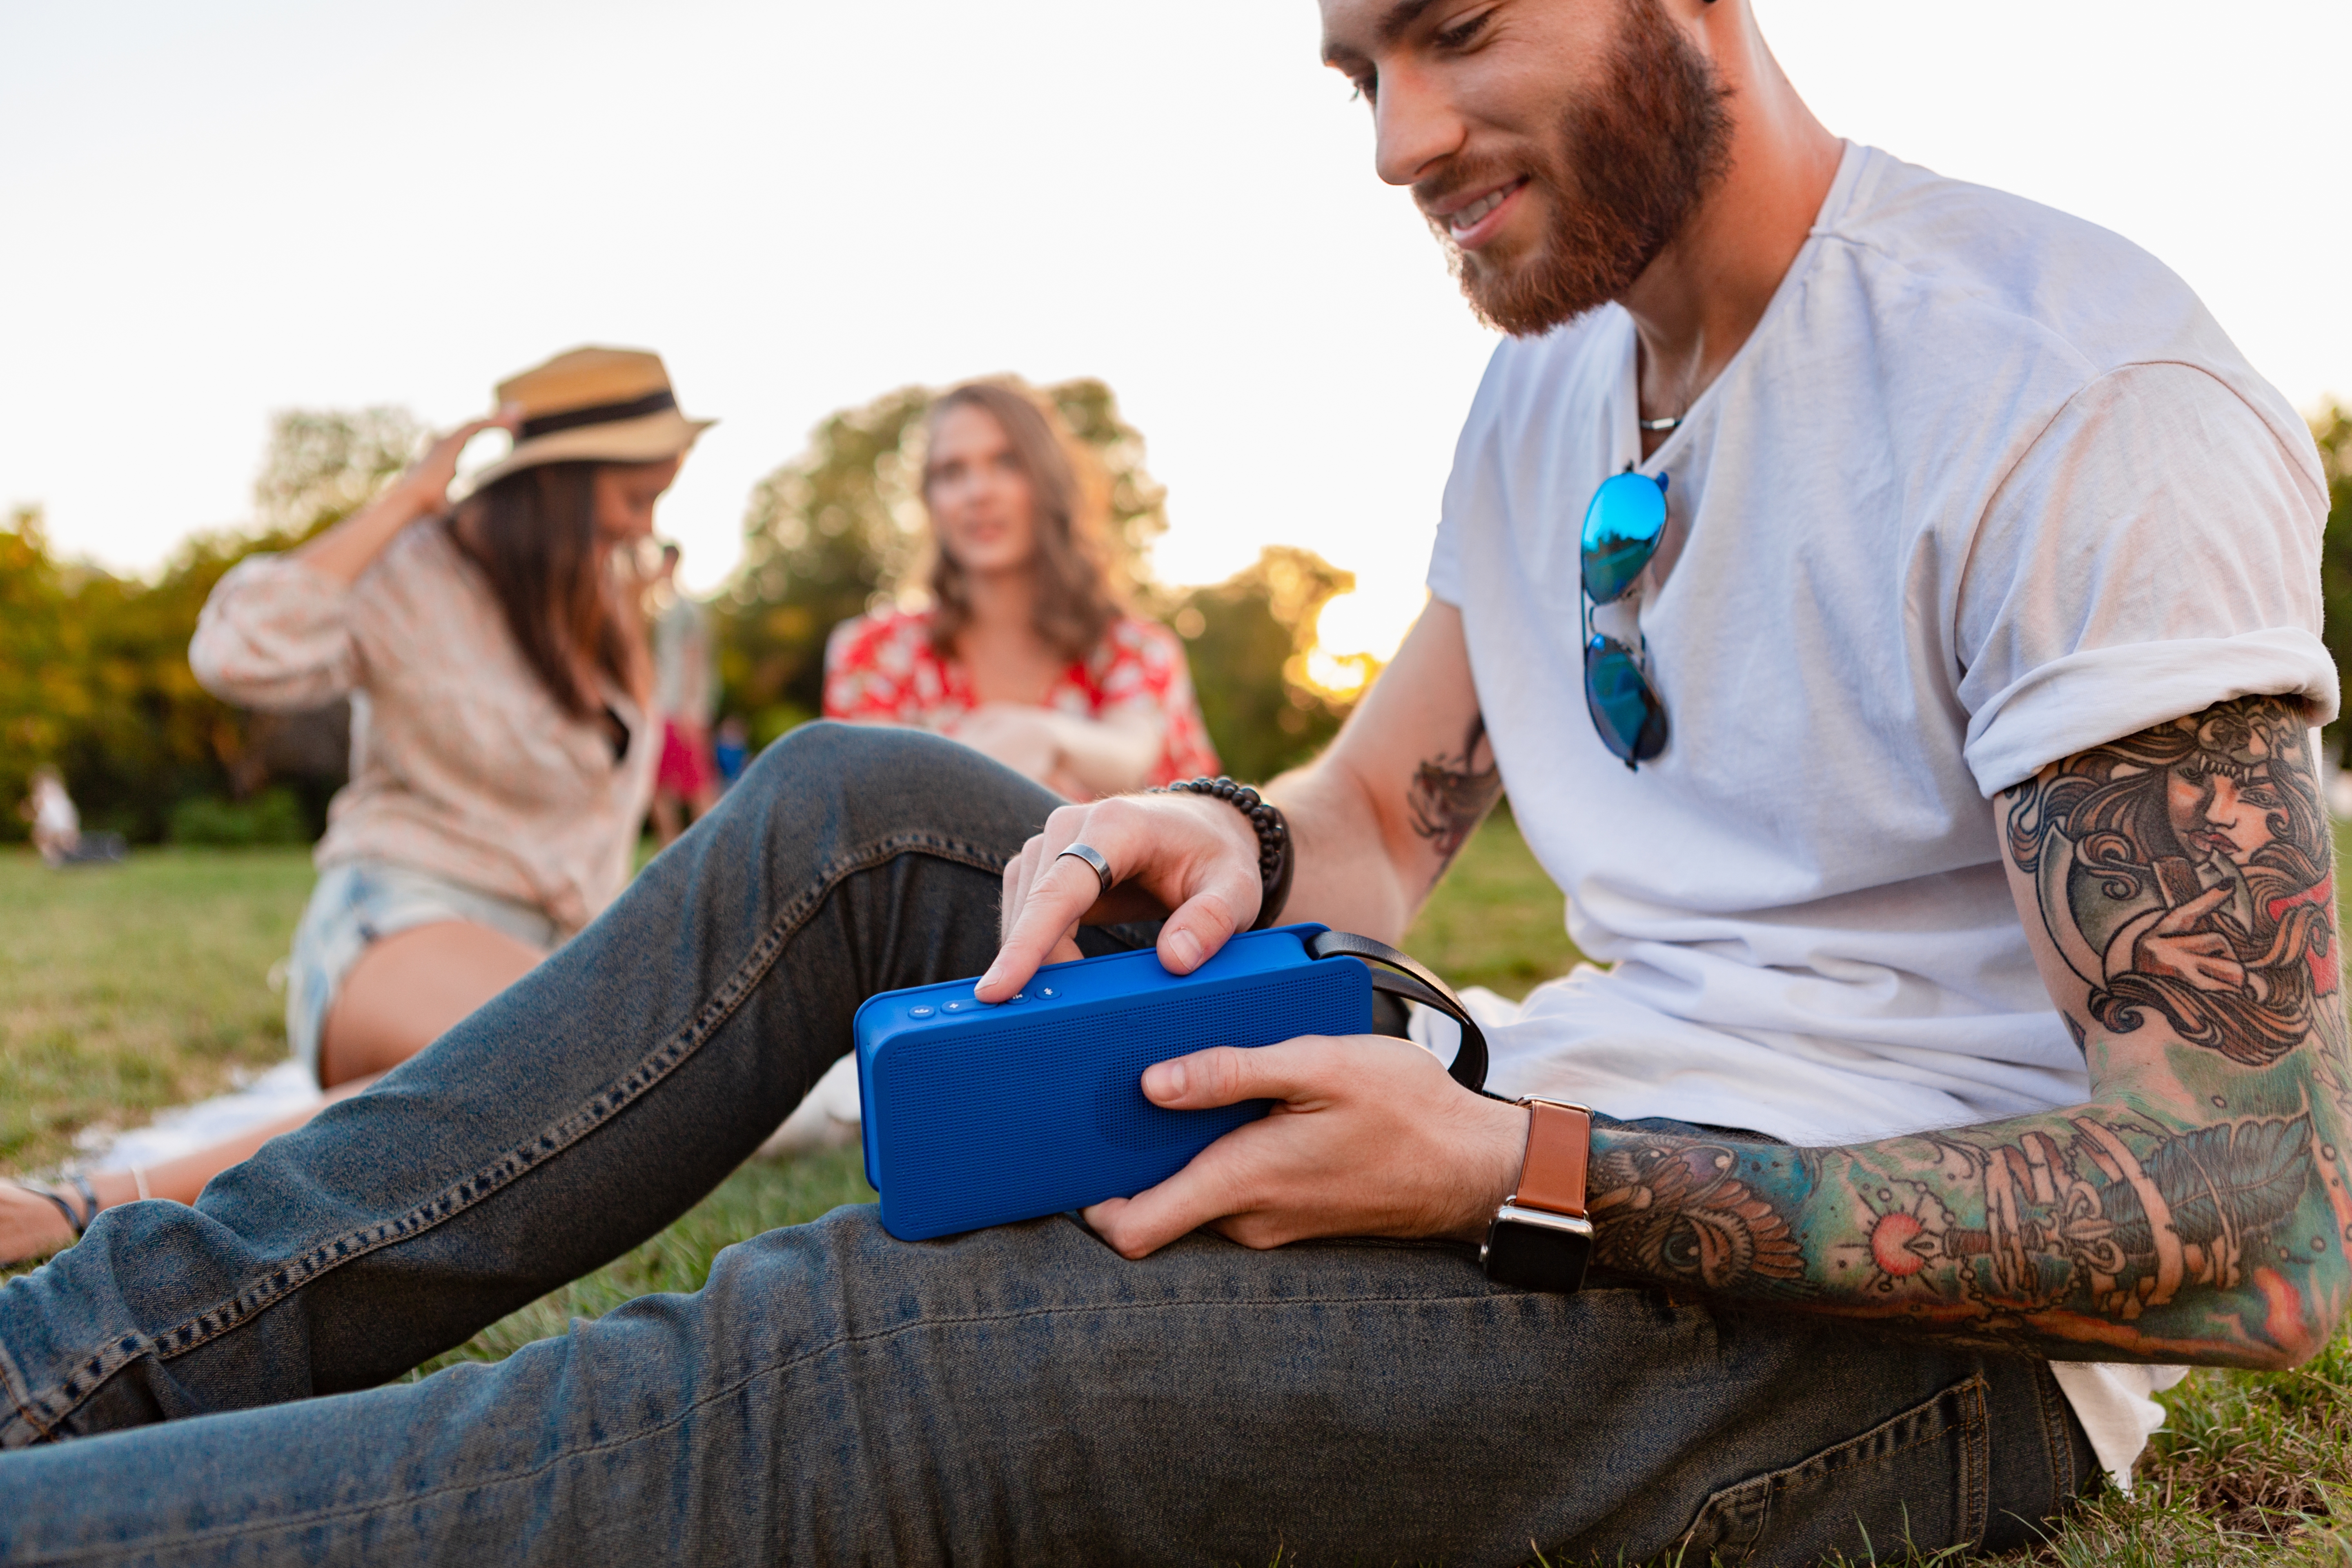 Man and two women sitting in a park listening to music on a blue outdoor speaker